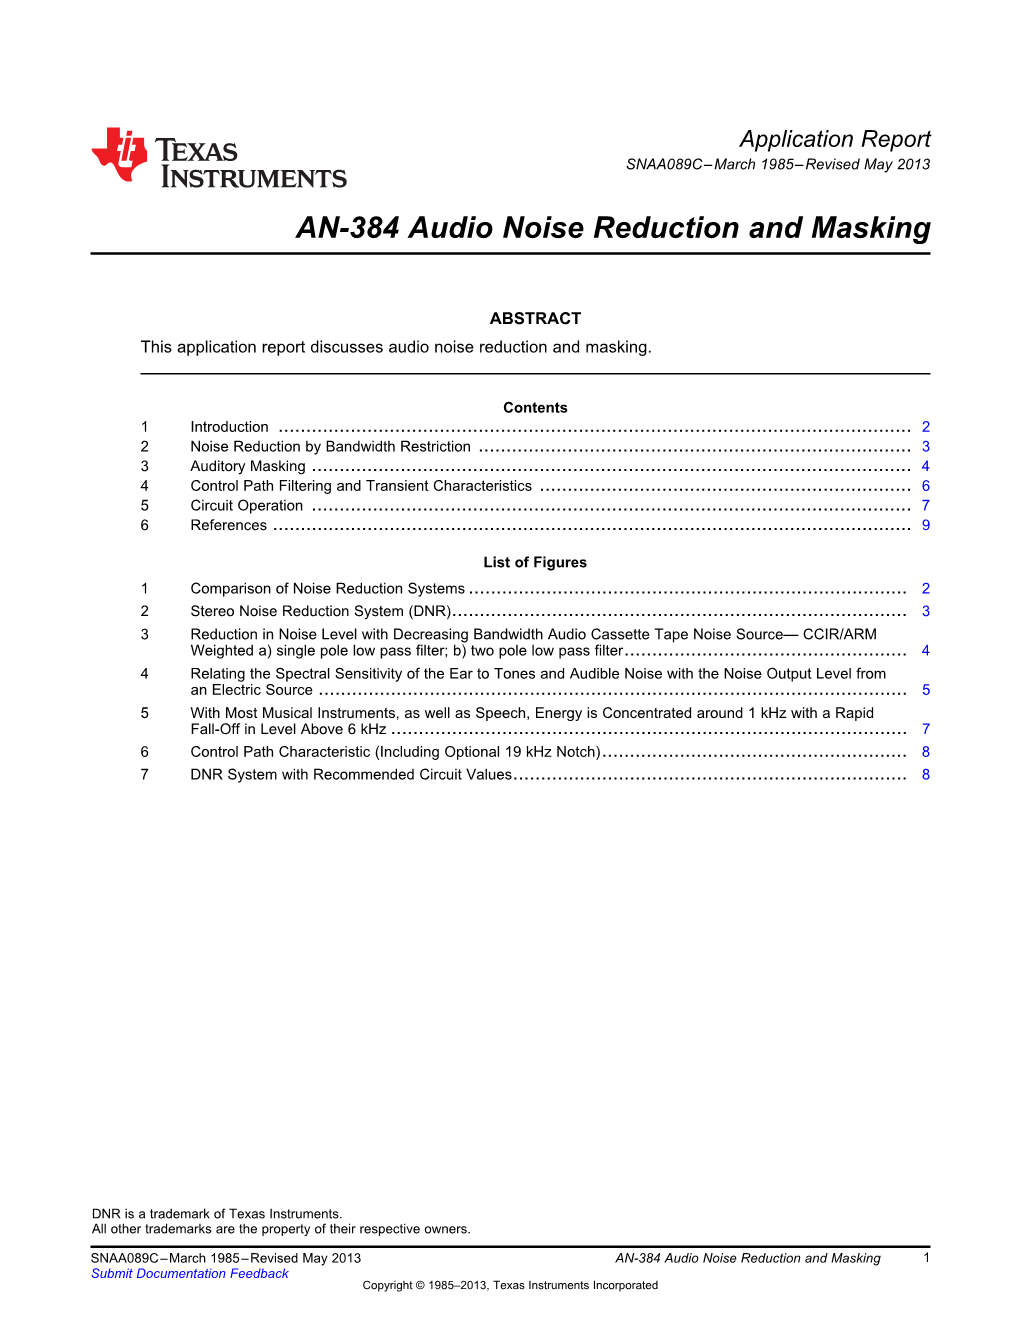 AN-384 Audio Noise Reduction and Masking